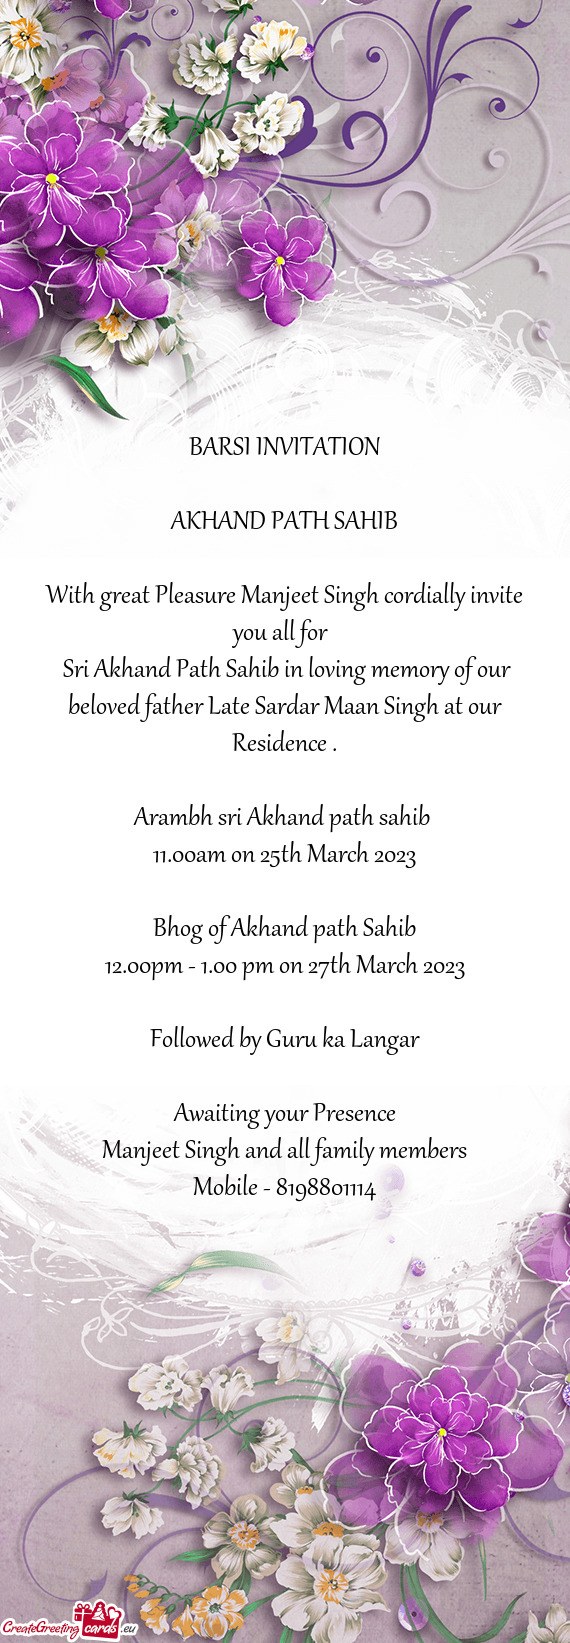 Sri Akhand Path Sahib in loving memory of our beloved father Late Sardar Maan Singh at our Residenc